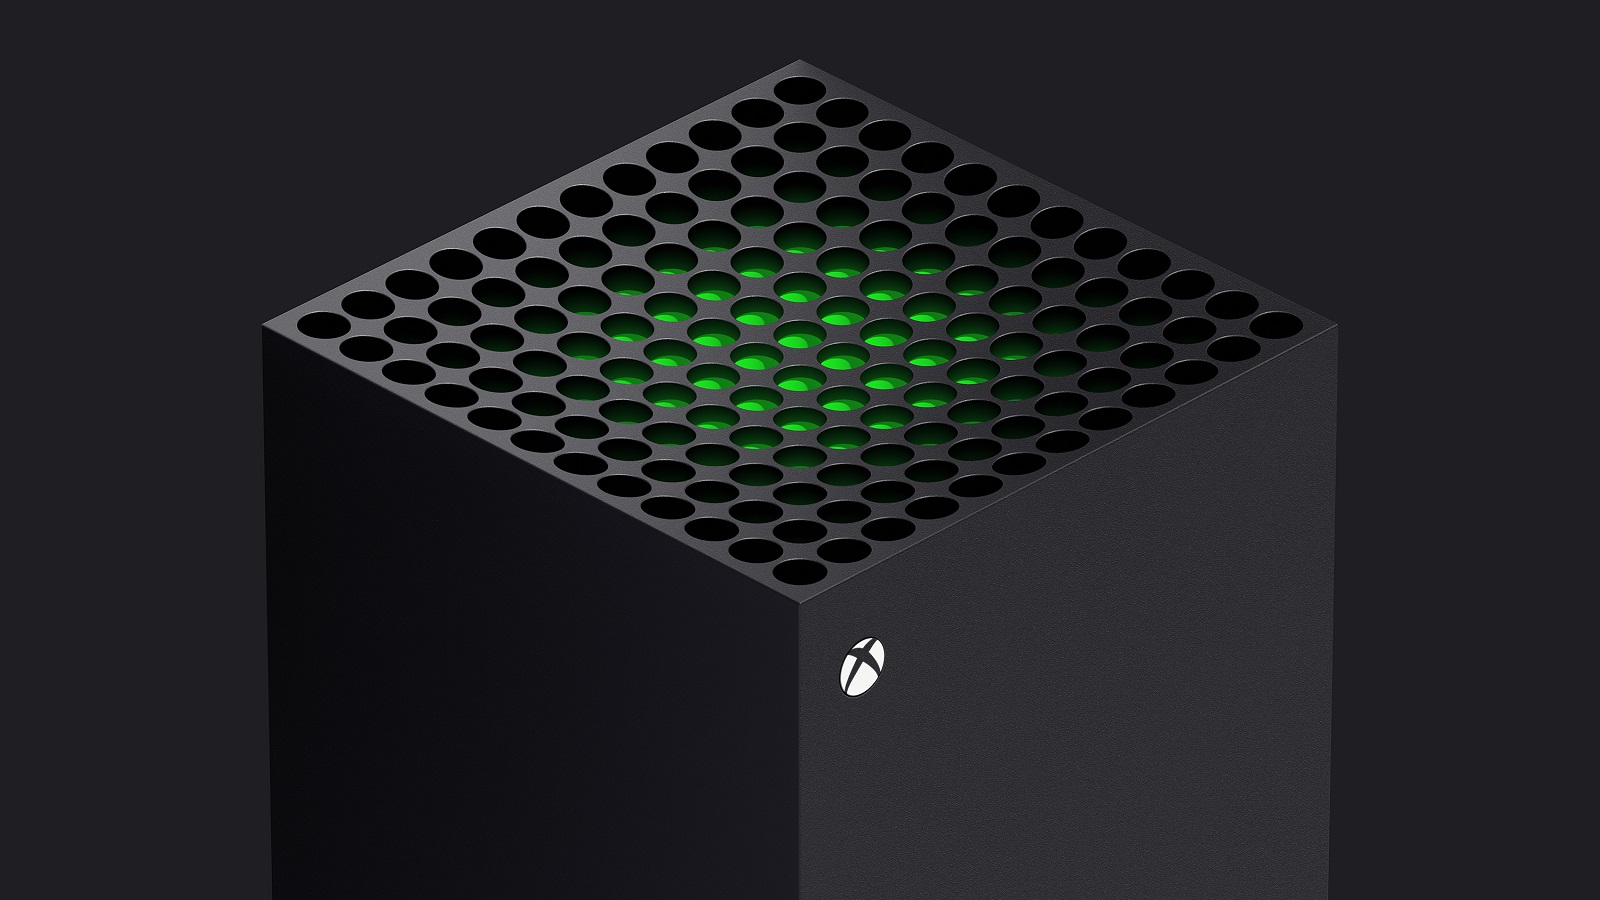 New Xbox Series X design refresh leaks about a year before launch